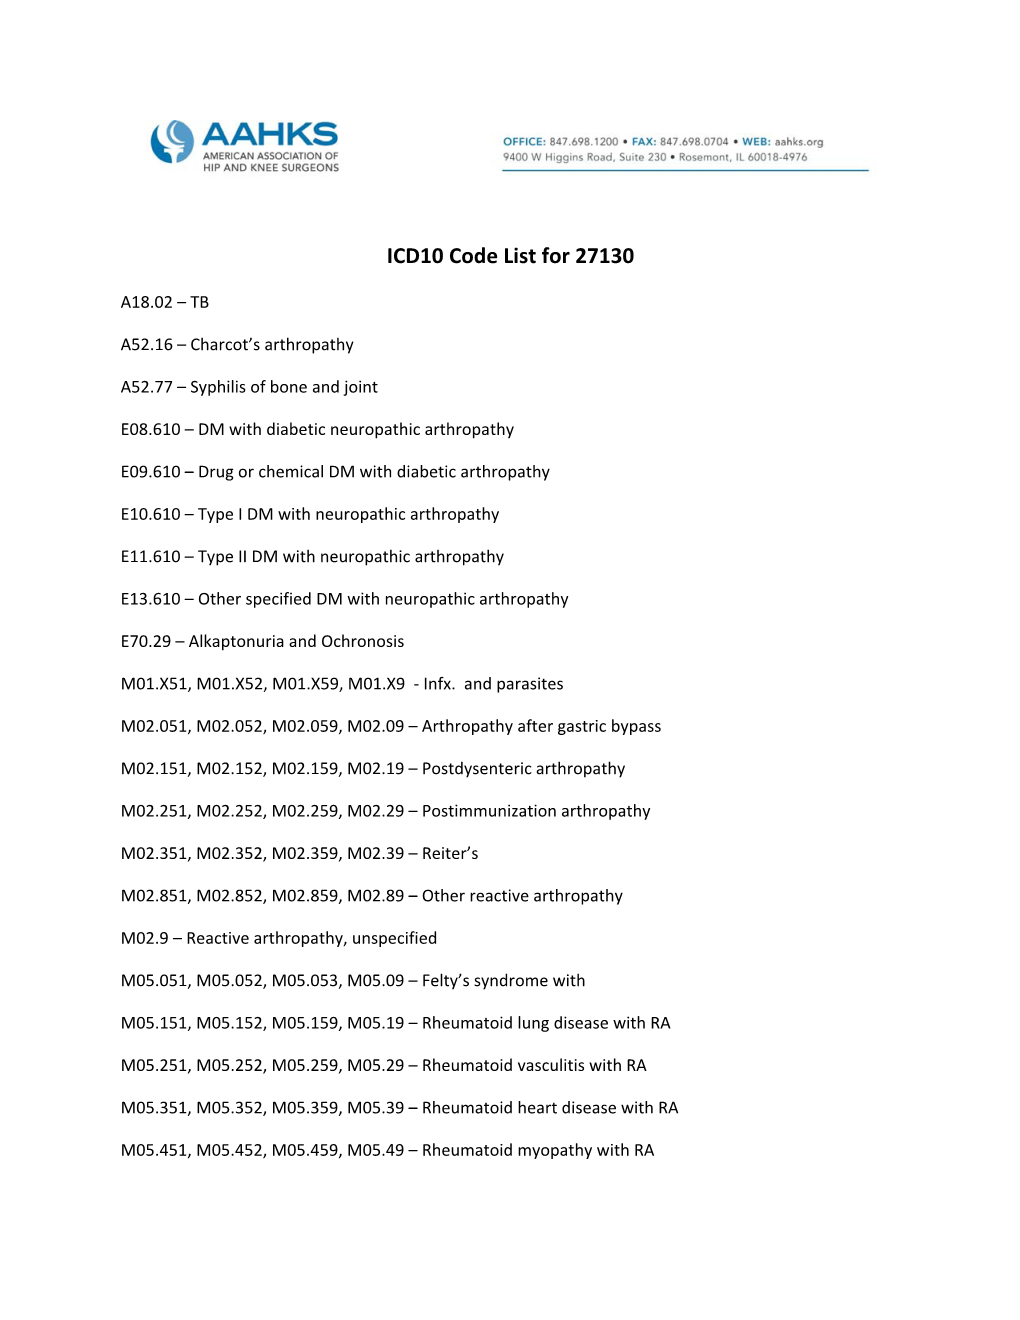 ICD10 Code List for 27130